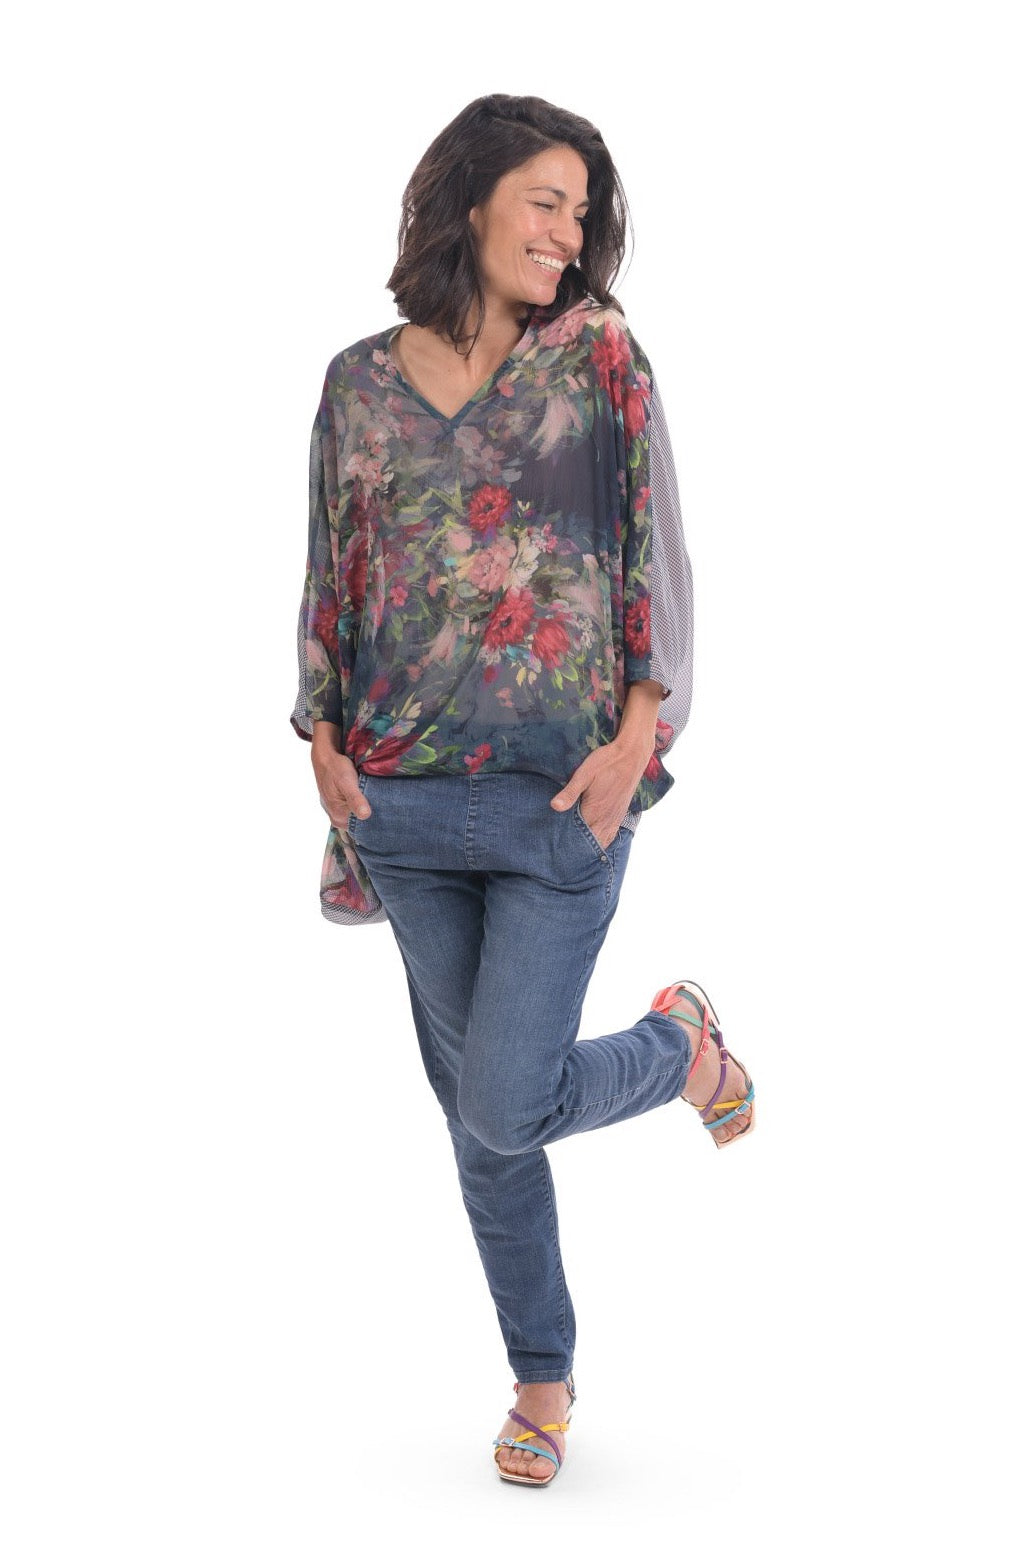 flora women's plus size tops and blouses